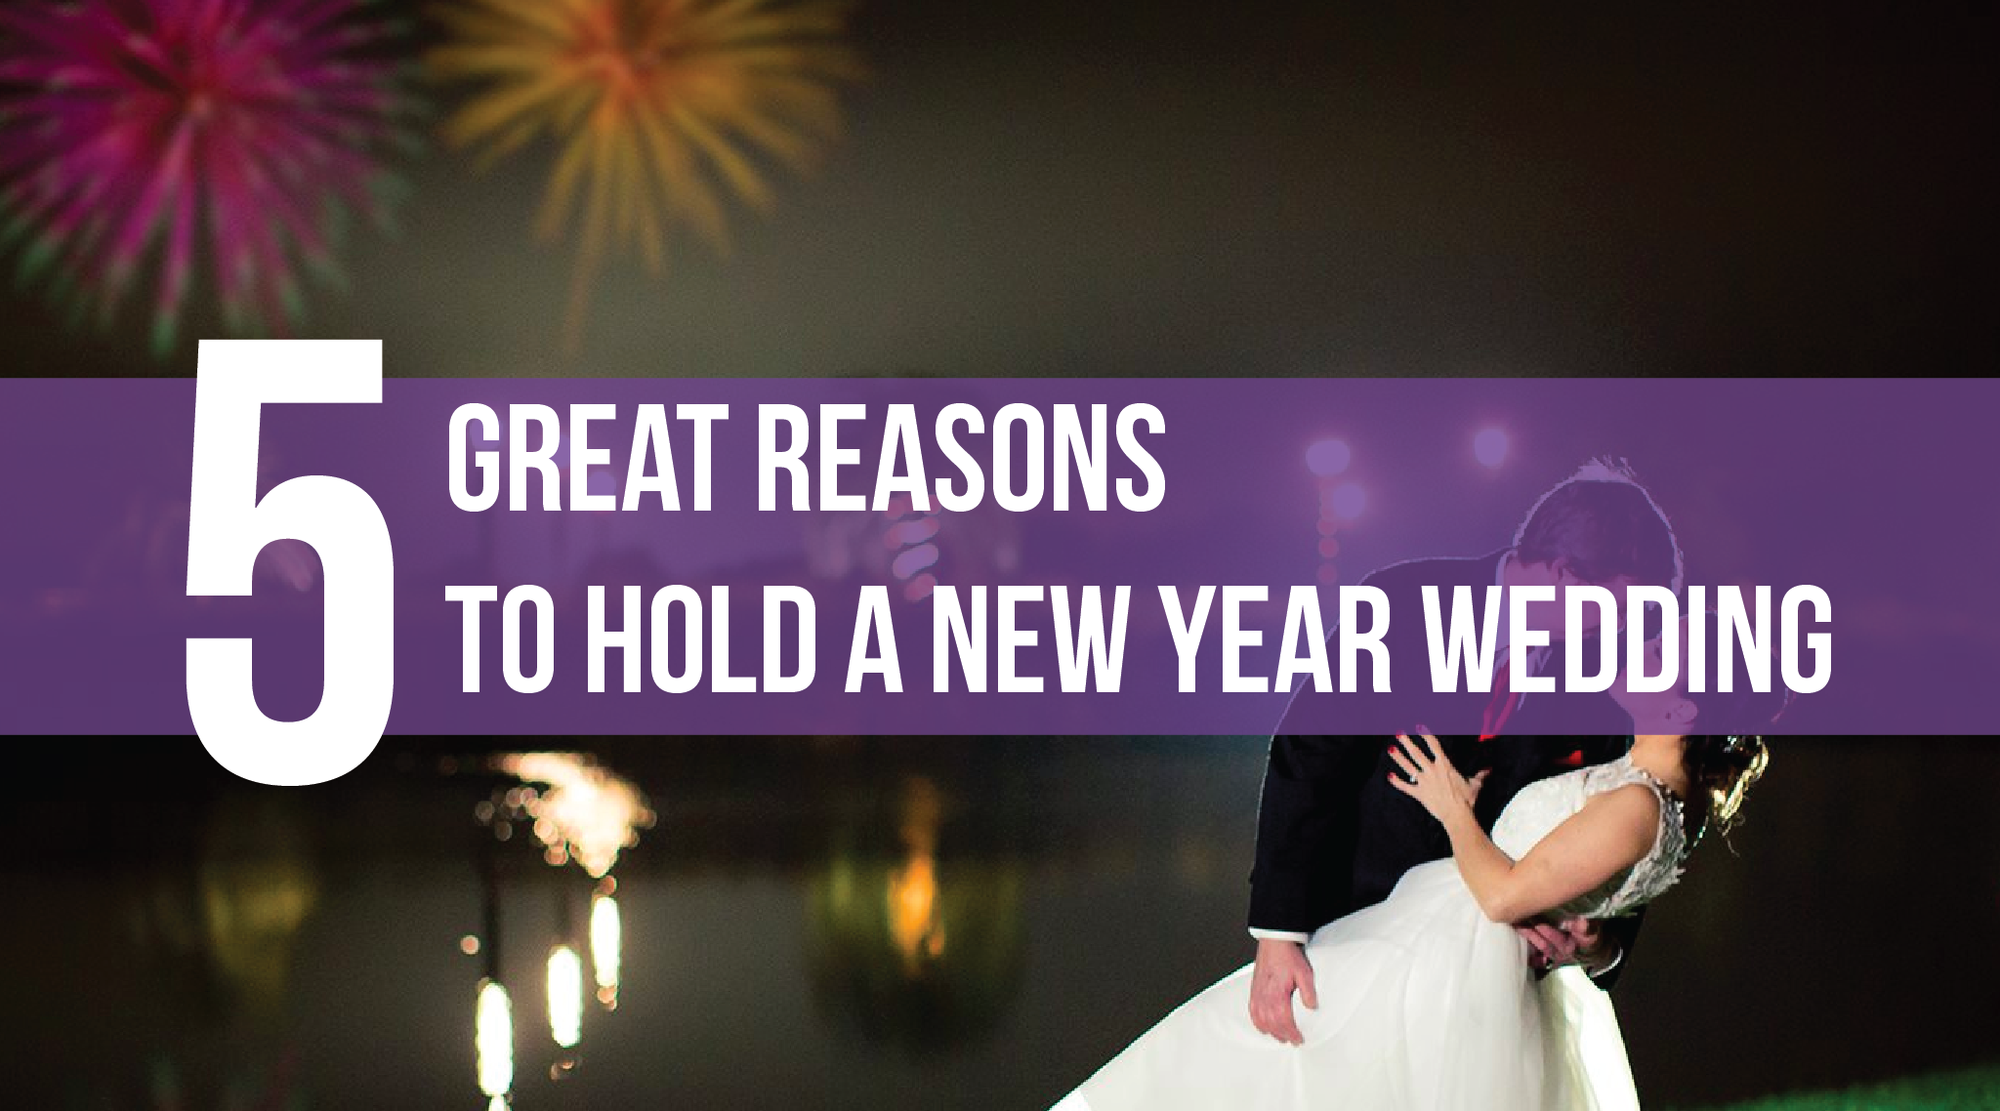 5 Great Reasons To Hold a New Year Wedding